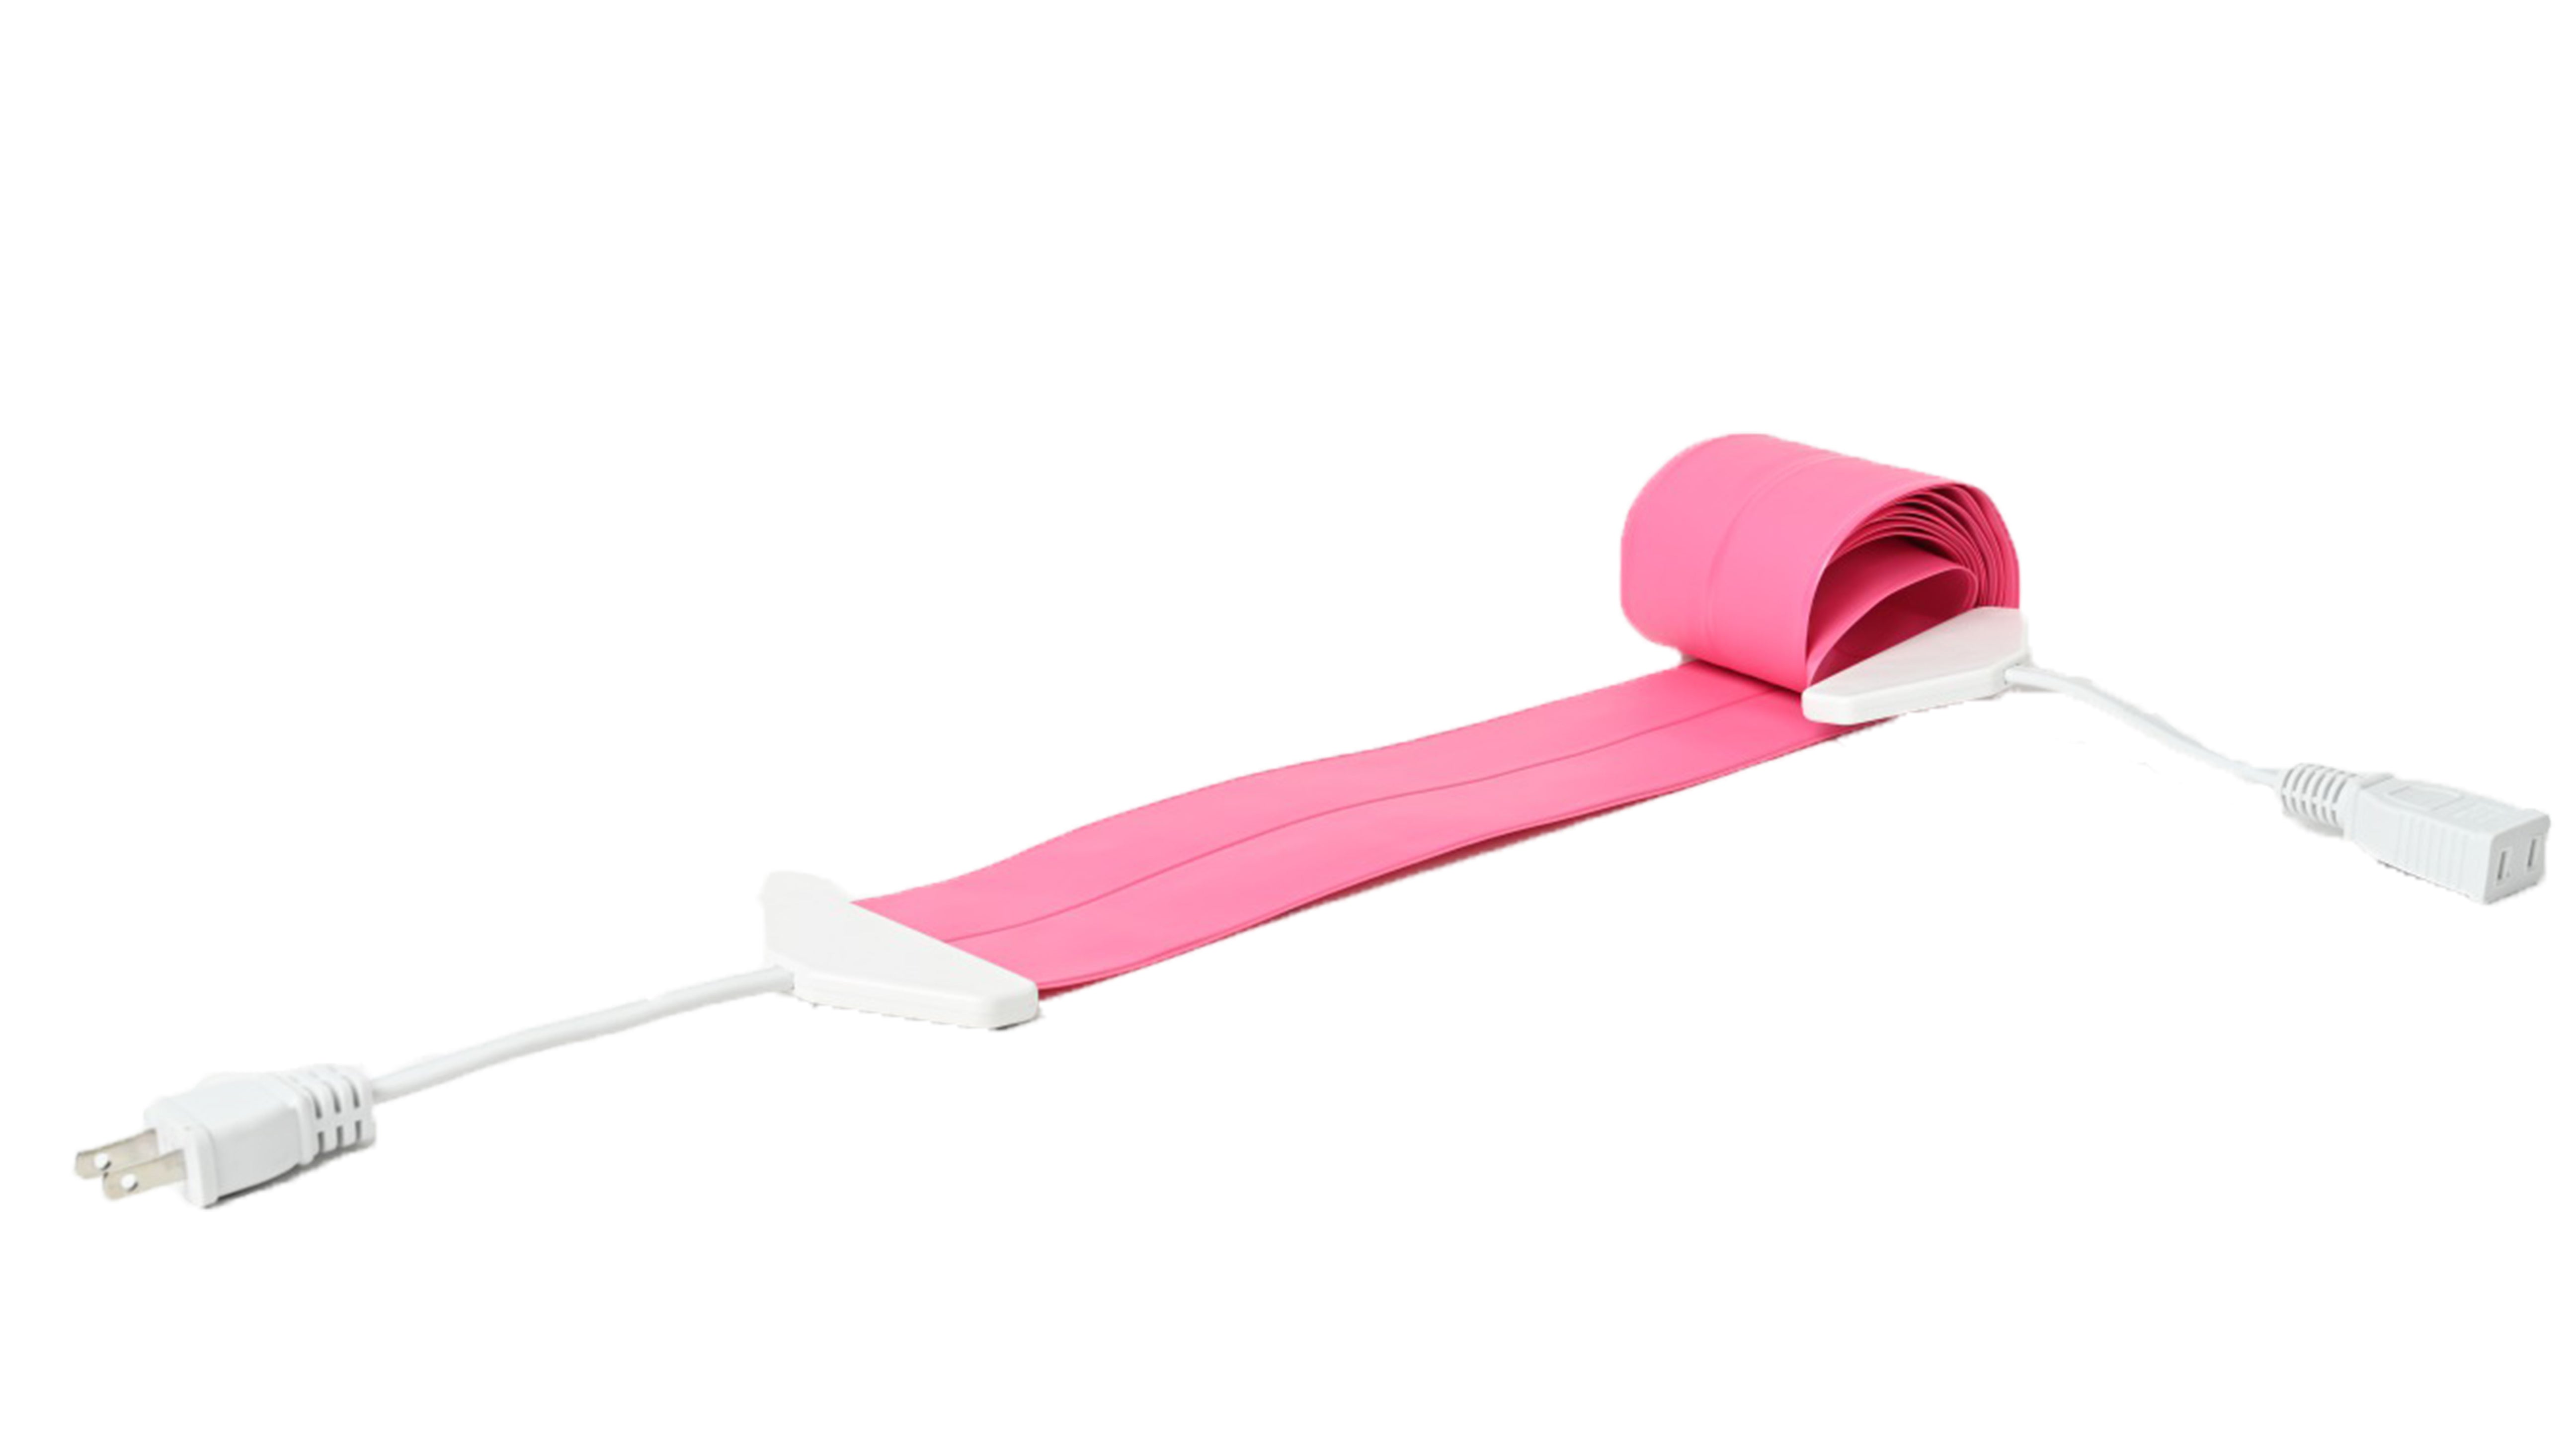 Koumeican the thinnest extension power cord in the world【Flower Pink】